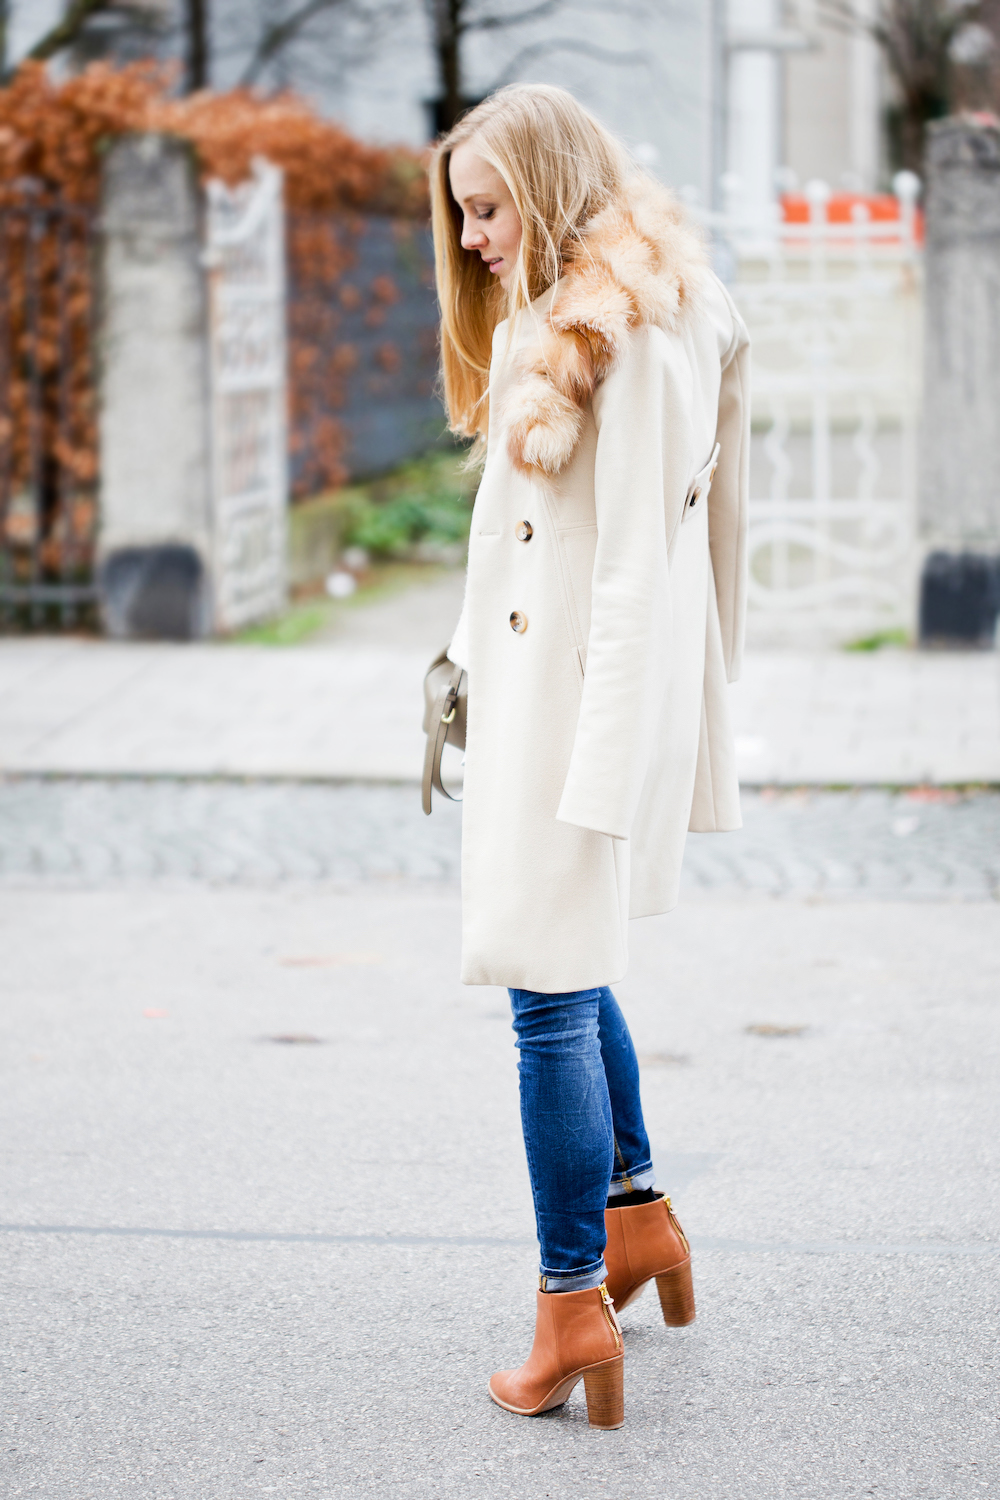 Embroidered blouse and fake fur coat, The Golden Bun | München Modeblog, German Fashion Blog, Fashionblogger, new trends